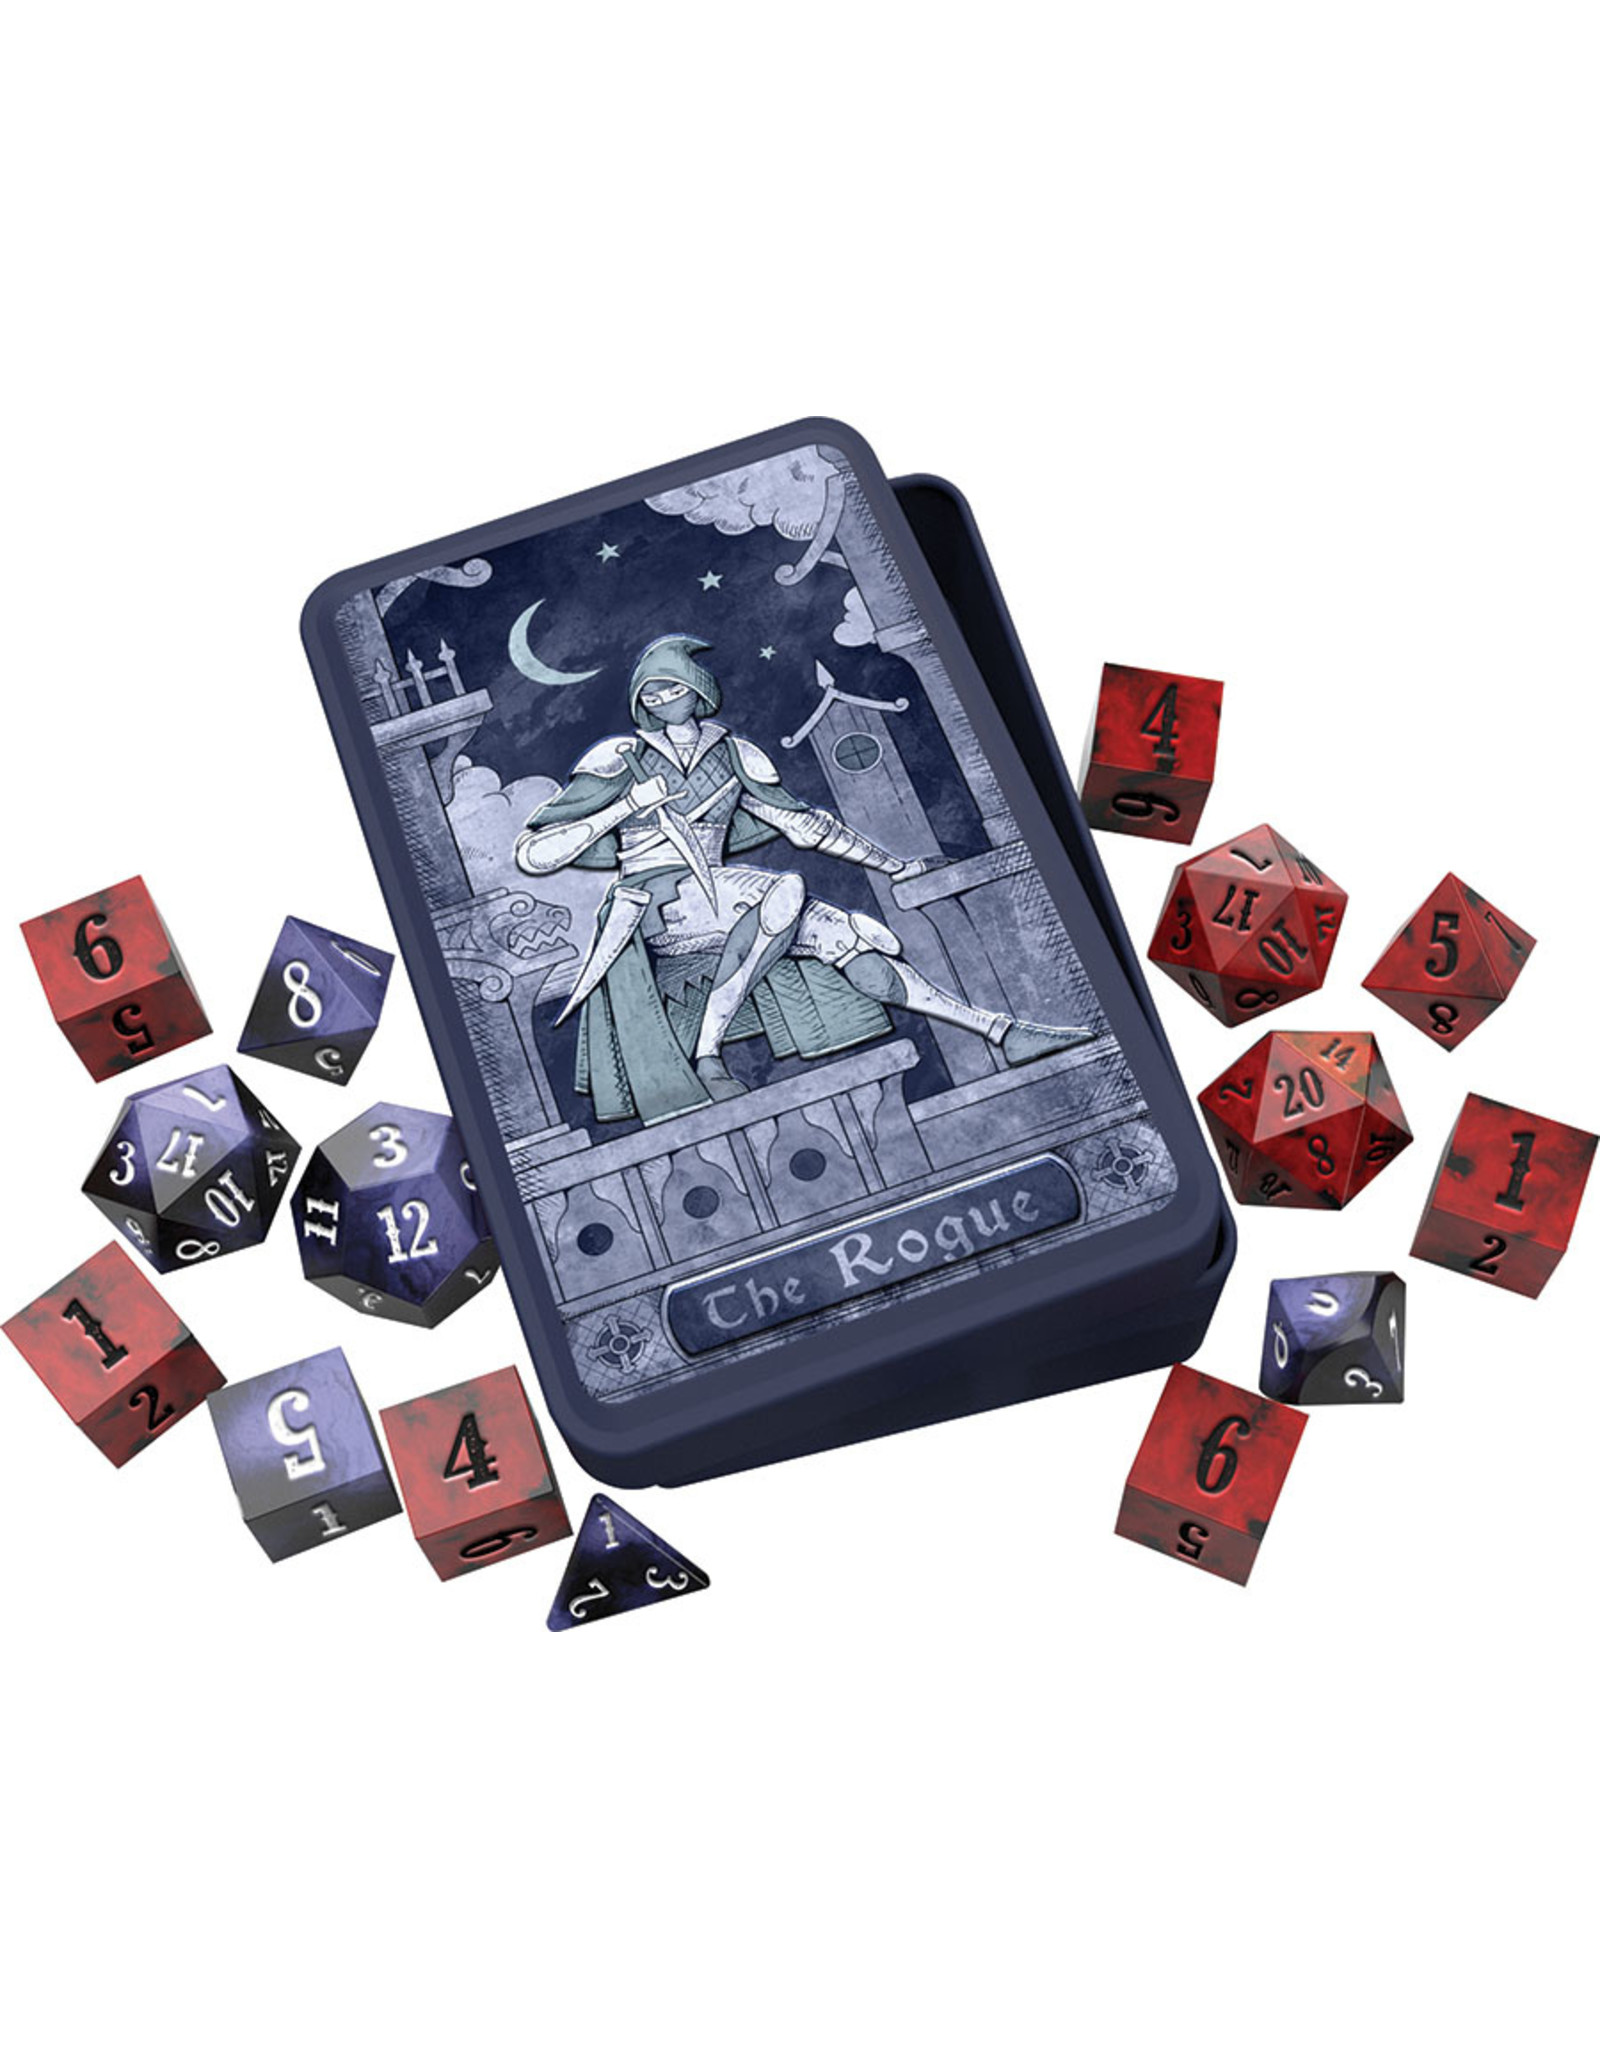 Beadle & Grimm's Class-Specific Dice Sets